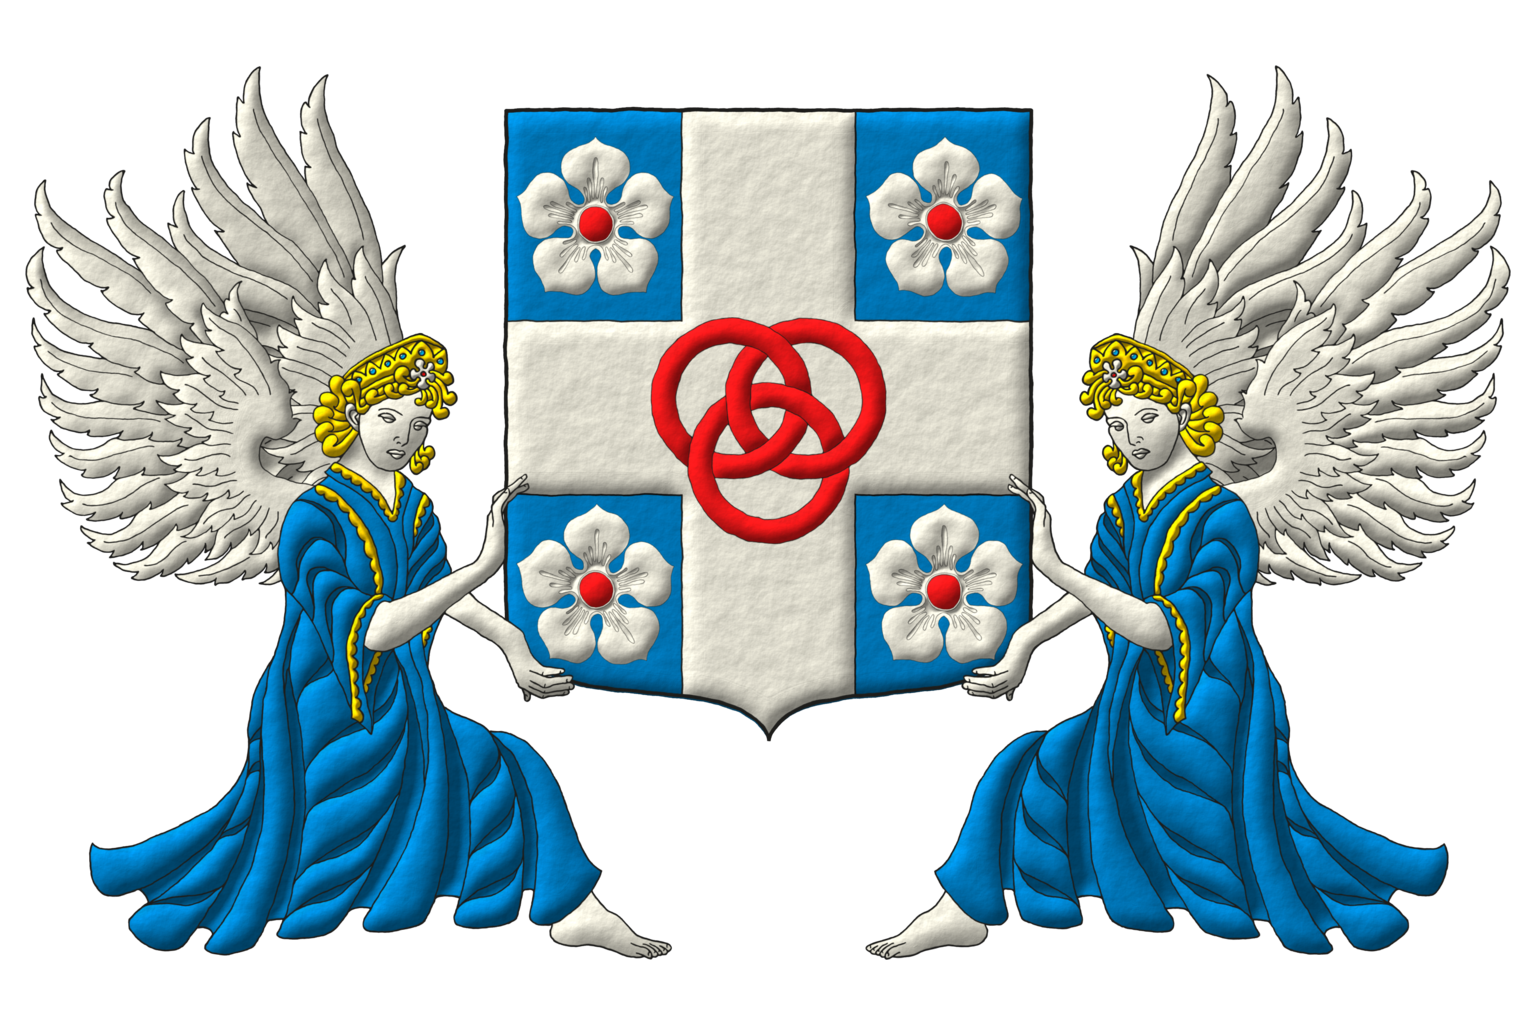 Azure, on a cross Argent, between four cinquefoils Argent, seeded Gules, three annulets interlaced Gules. Supporters: Two angels Argent, vested Azure, crined and crowned Or.